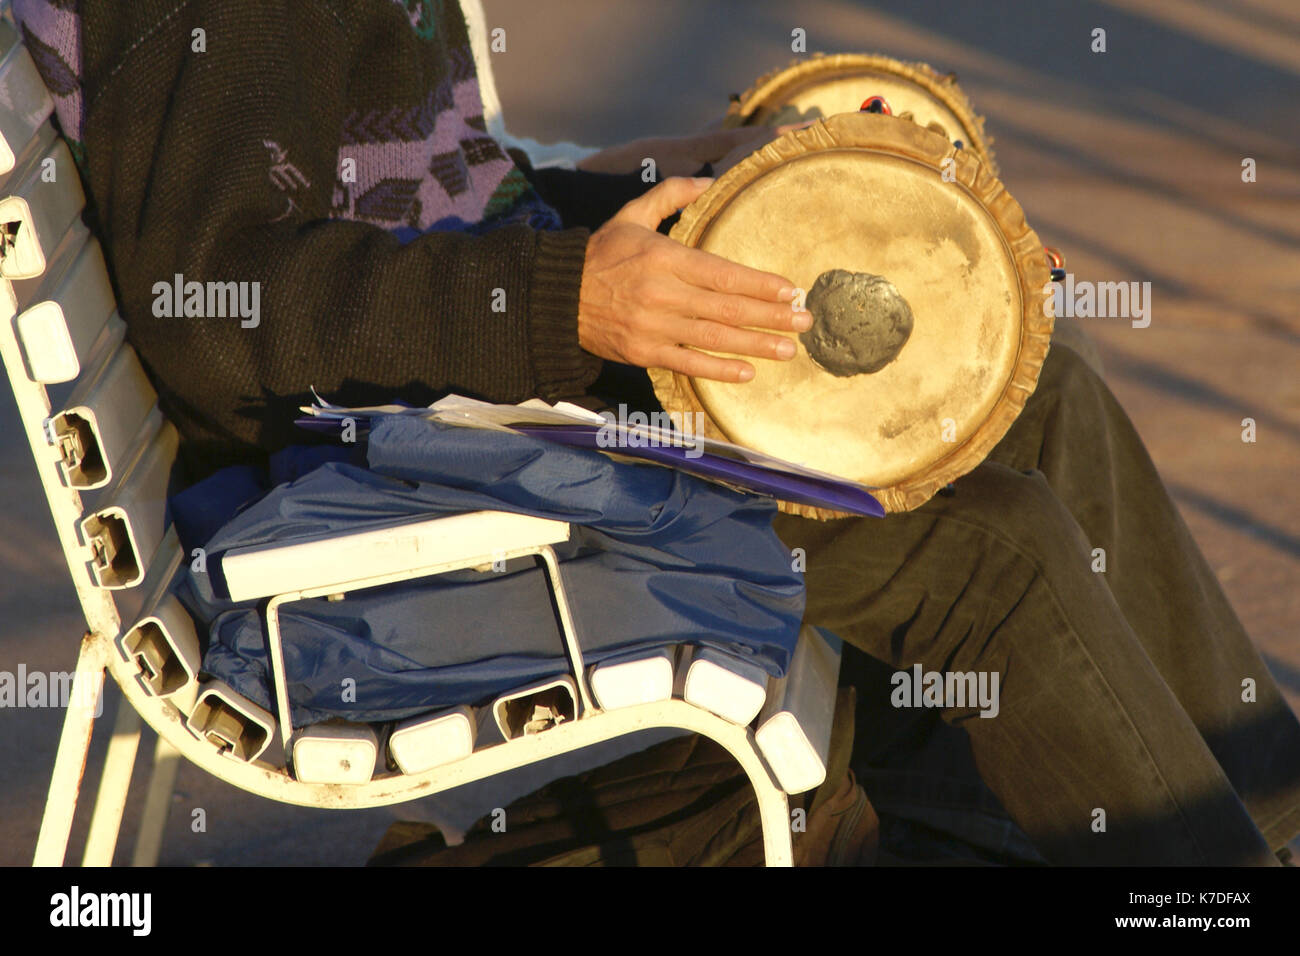 A man in street playing with a tambourine Stock Photo